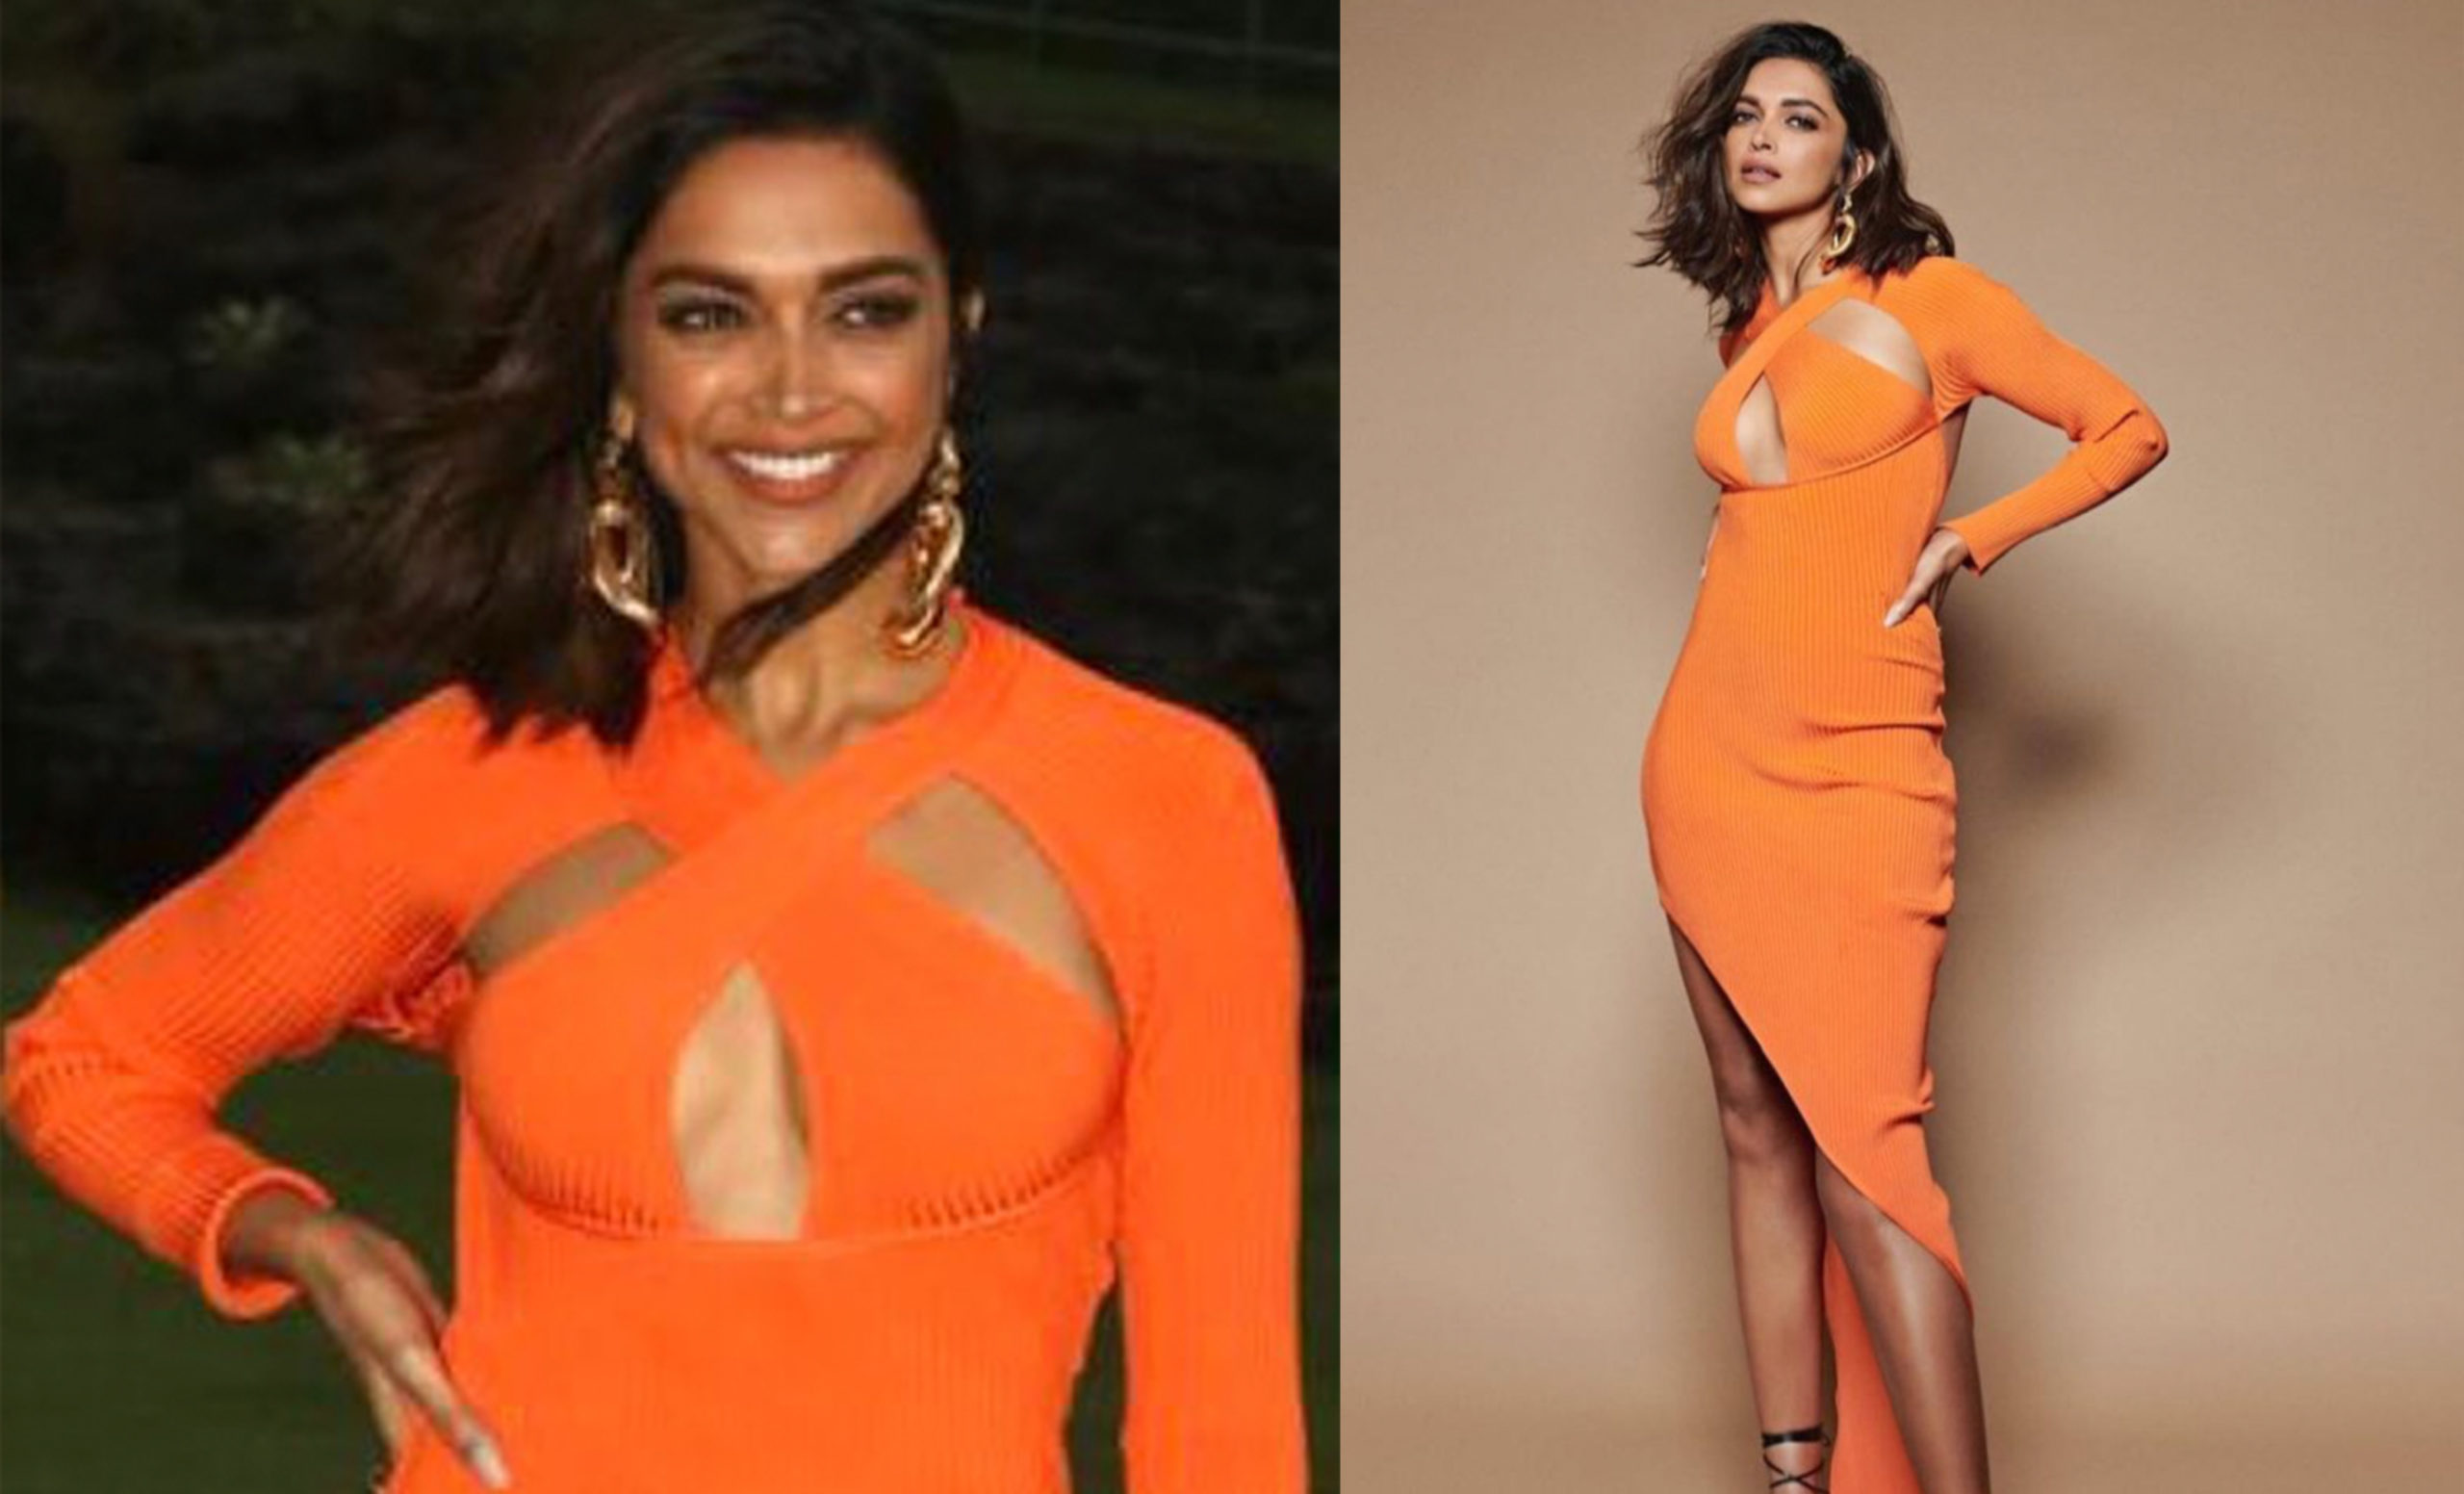 Deepika Padukone Looks ‘Oh-So-Hot’ In An Orange Cut-Out Dress At A Promotional Event For ‘Gehraiyaan’